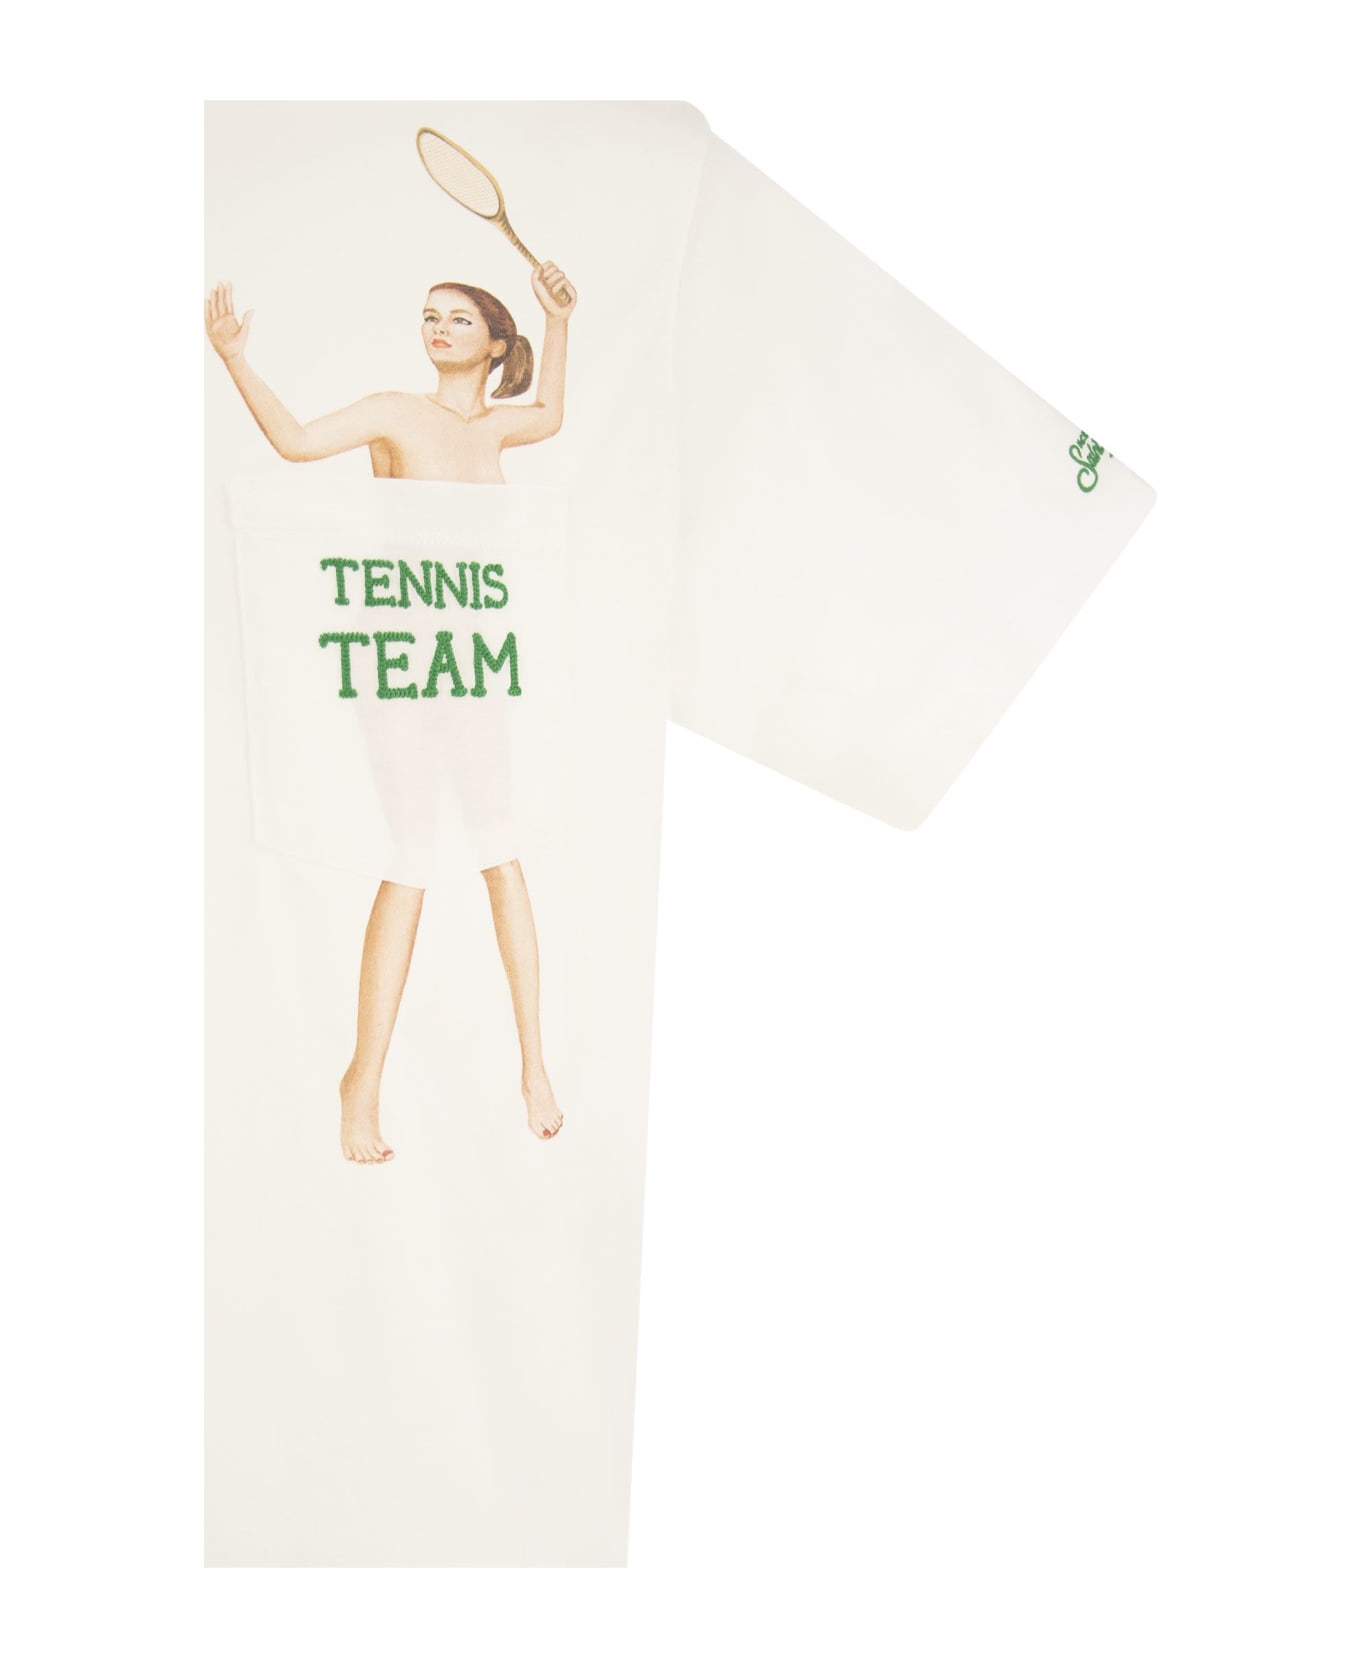 MC2 Saint Barth Tennis Team T-shirt With Embroidery On Pocket - White シャツ